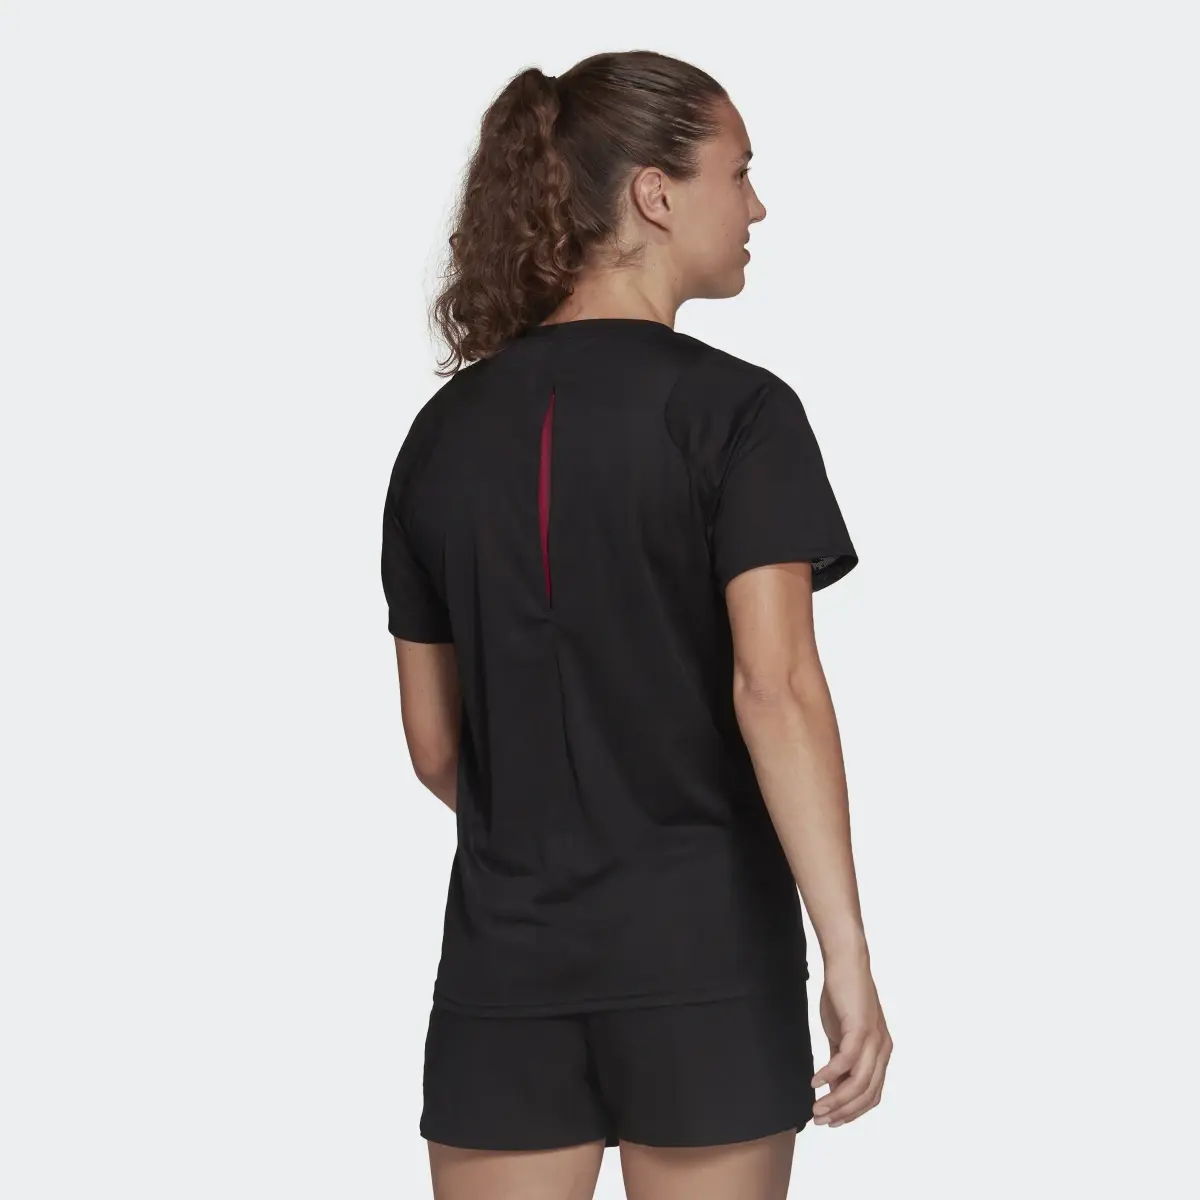 Adidas Made To Be Remade Running T-Shirt. 3